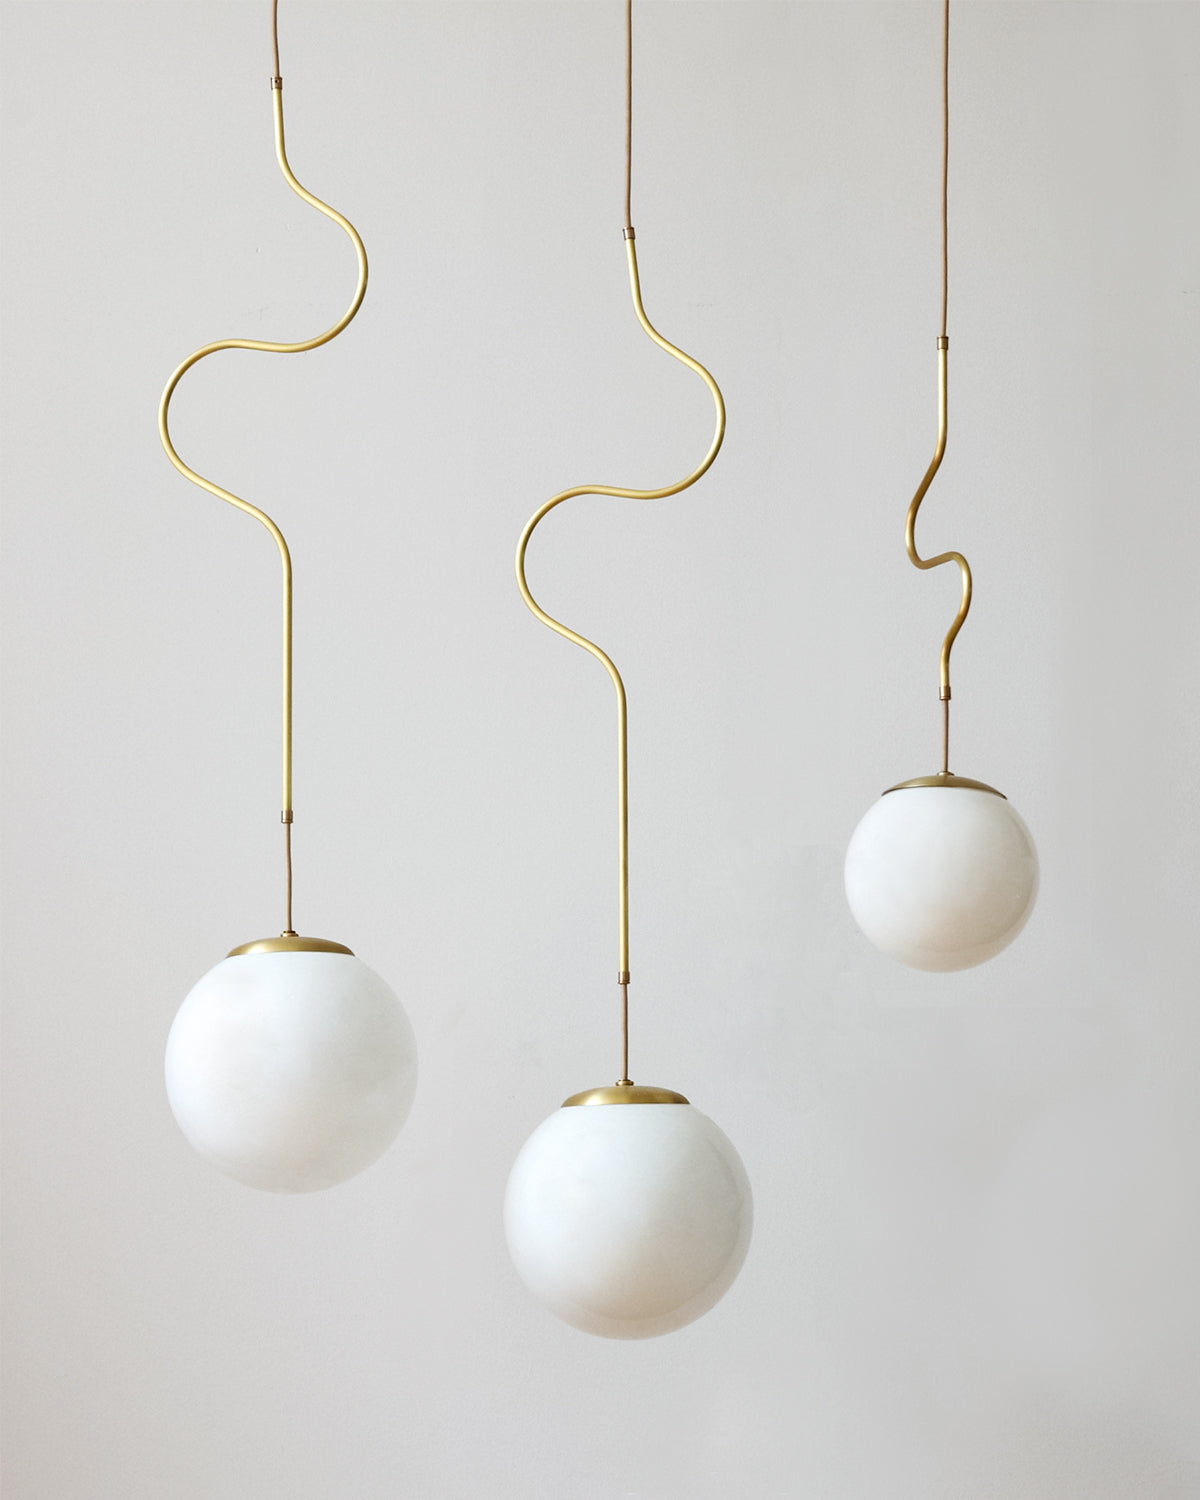 Satin brass Contour ceiling pendant lights made by Lostine in Philadelphia, Pennsylvania.  Satin brass modern lighting design with white glass globe.  Hardwired light fixture.  Simple interior design, made in the USA.